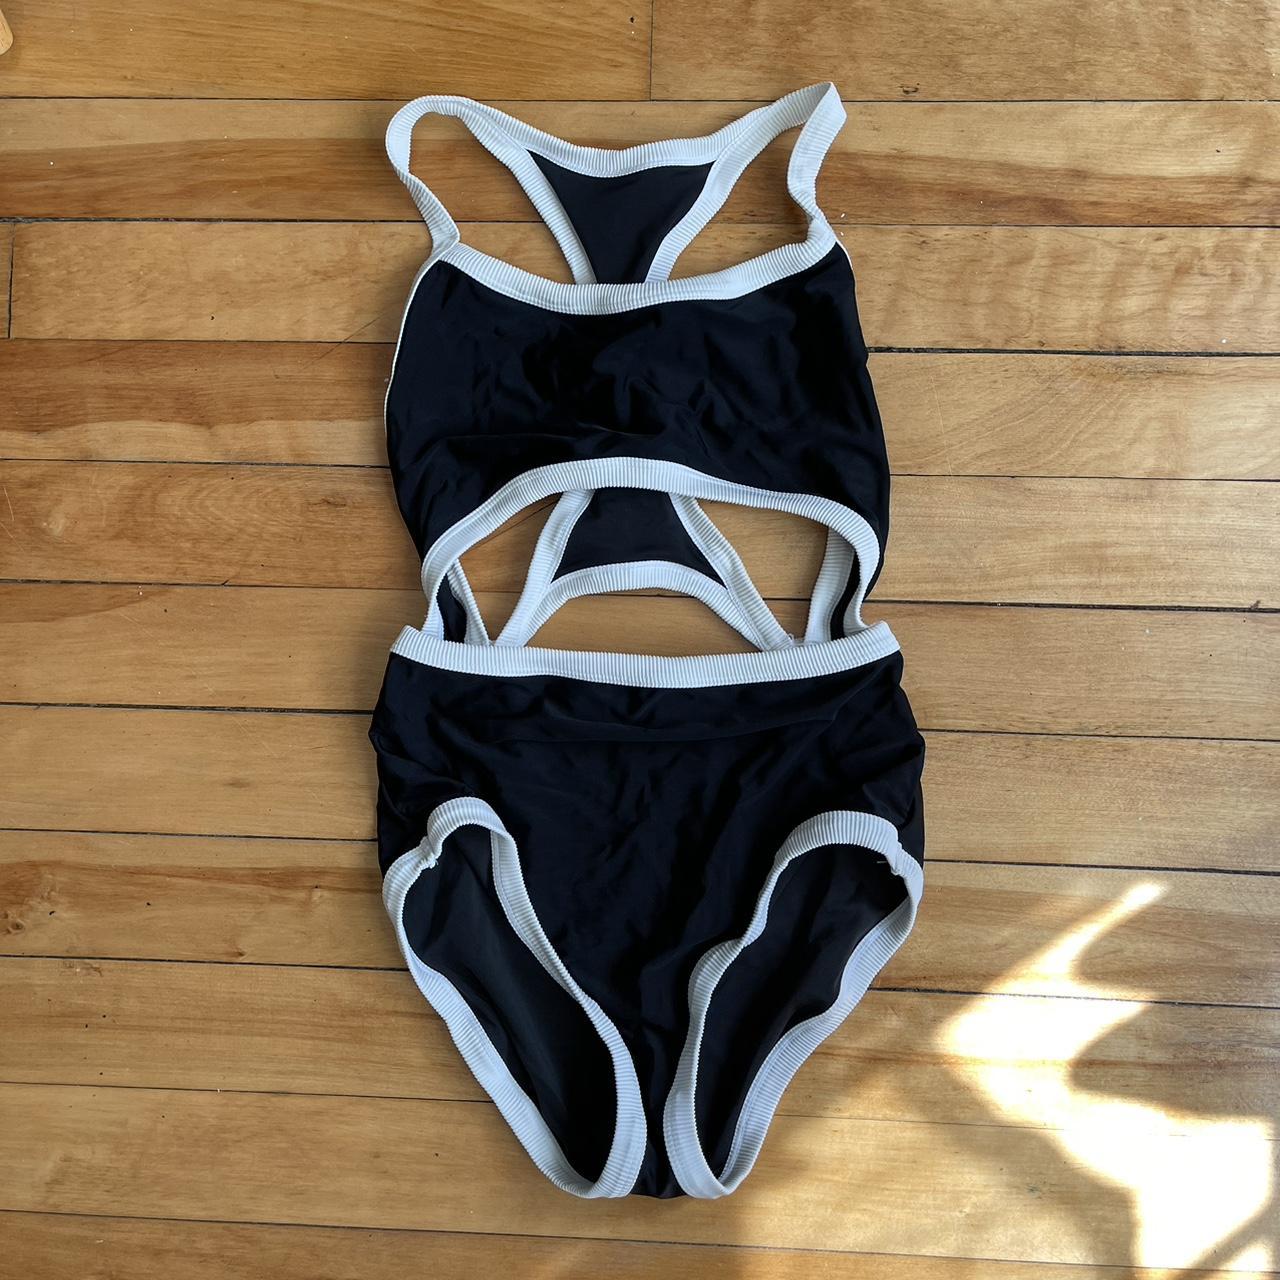 Aerie Women's Black and White Swimsuit-one-piece | Depop